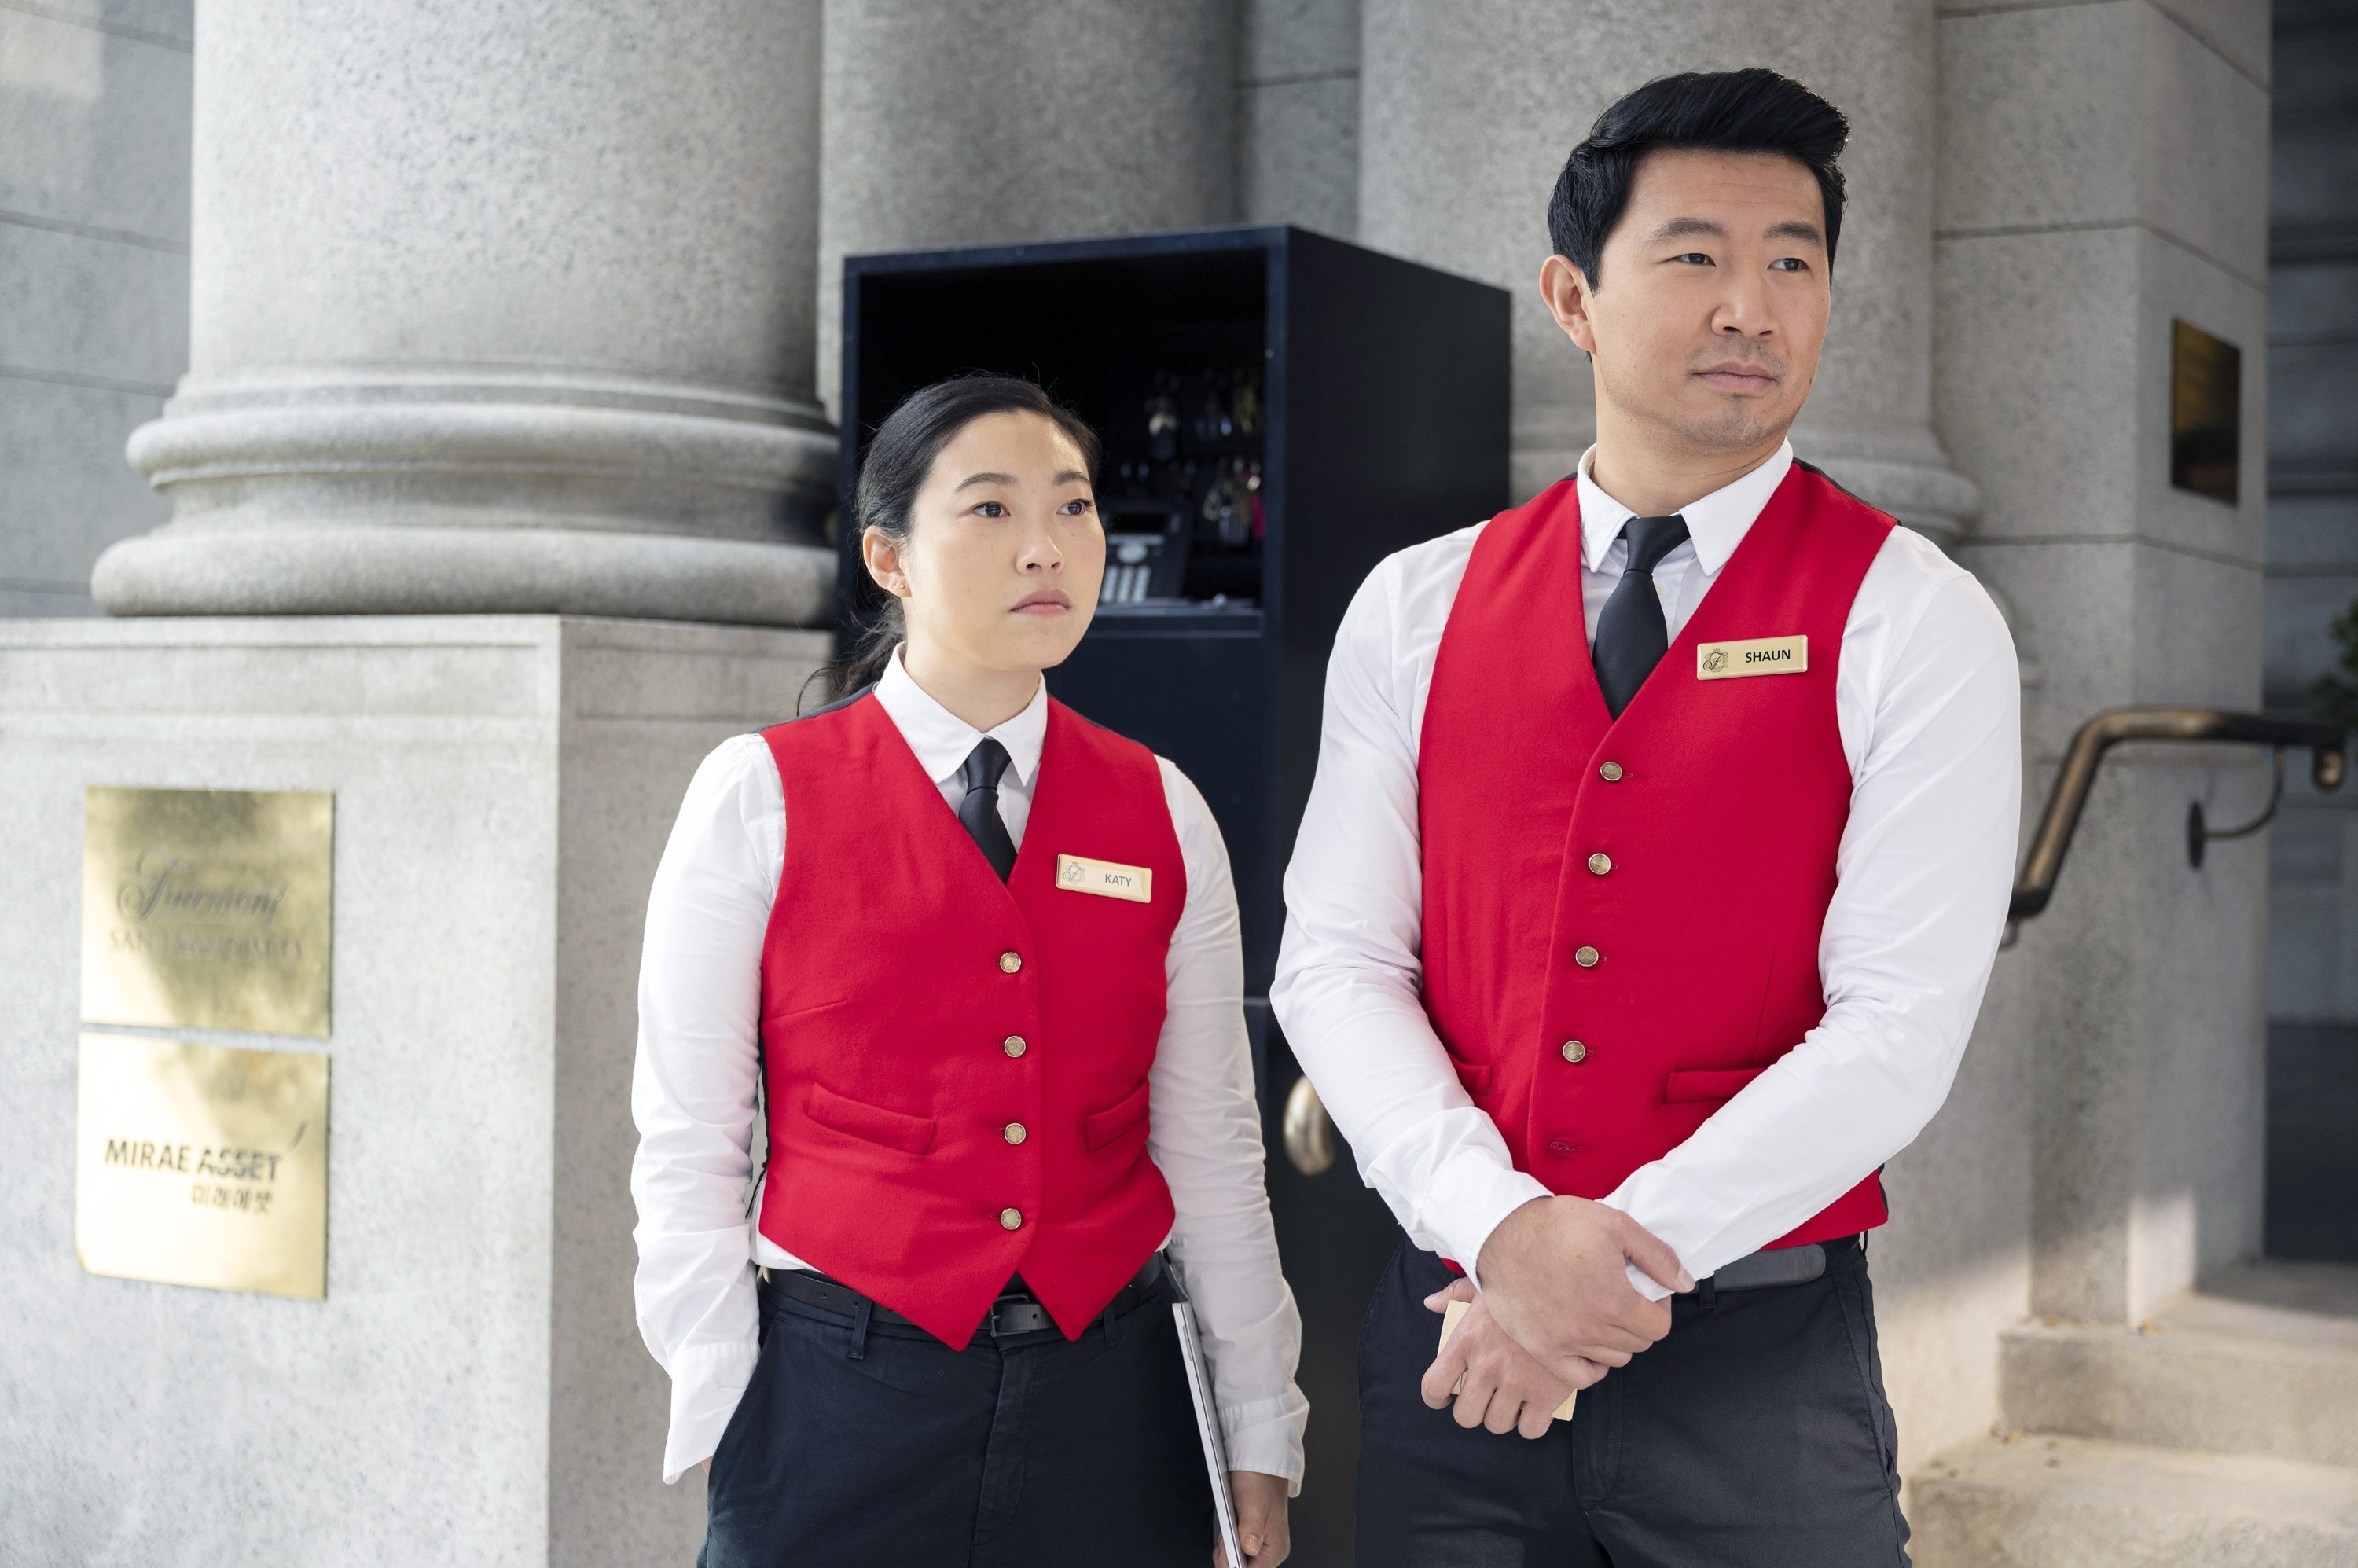 in a scene, Awkwafina and Simu portraying valet attendants in vests and name tags stand near a building